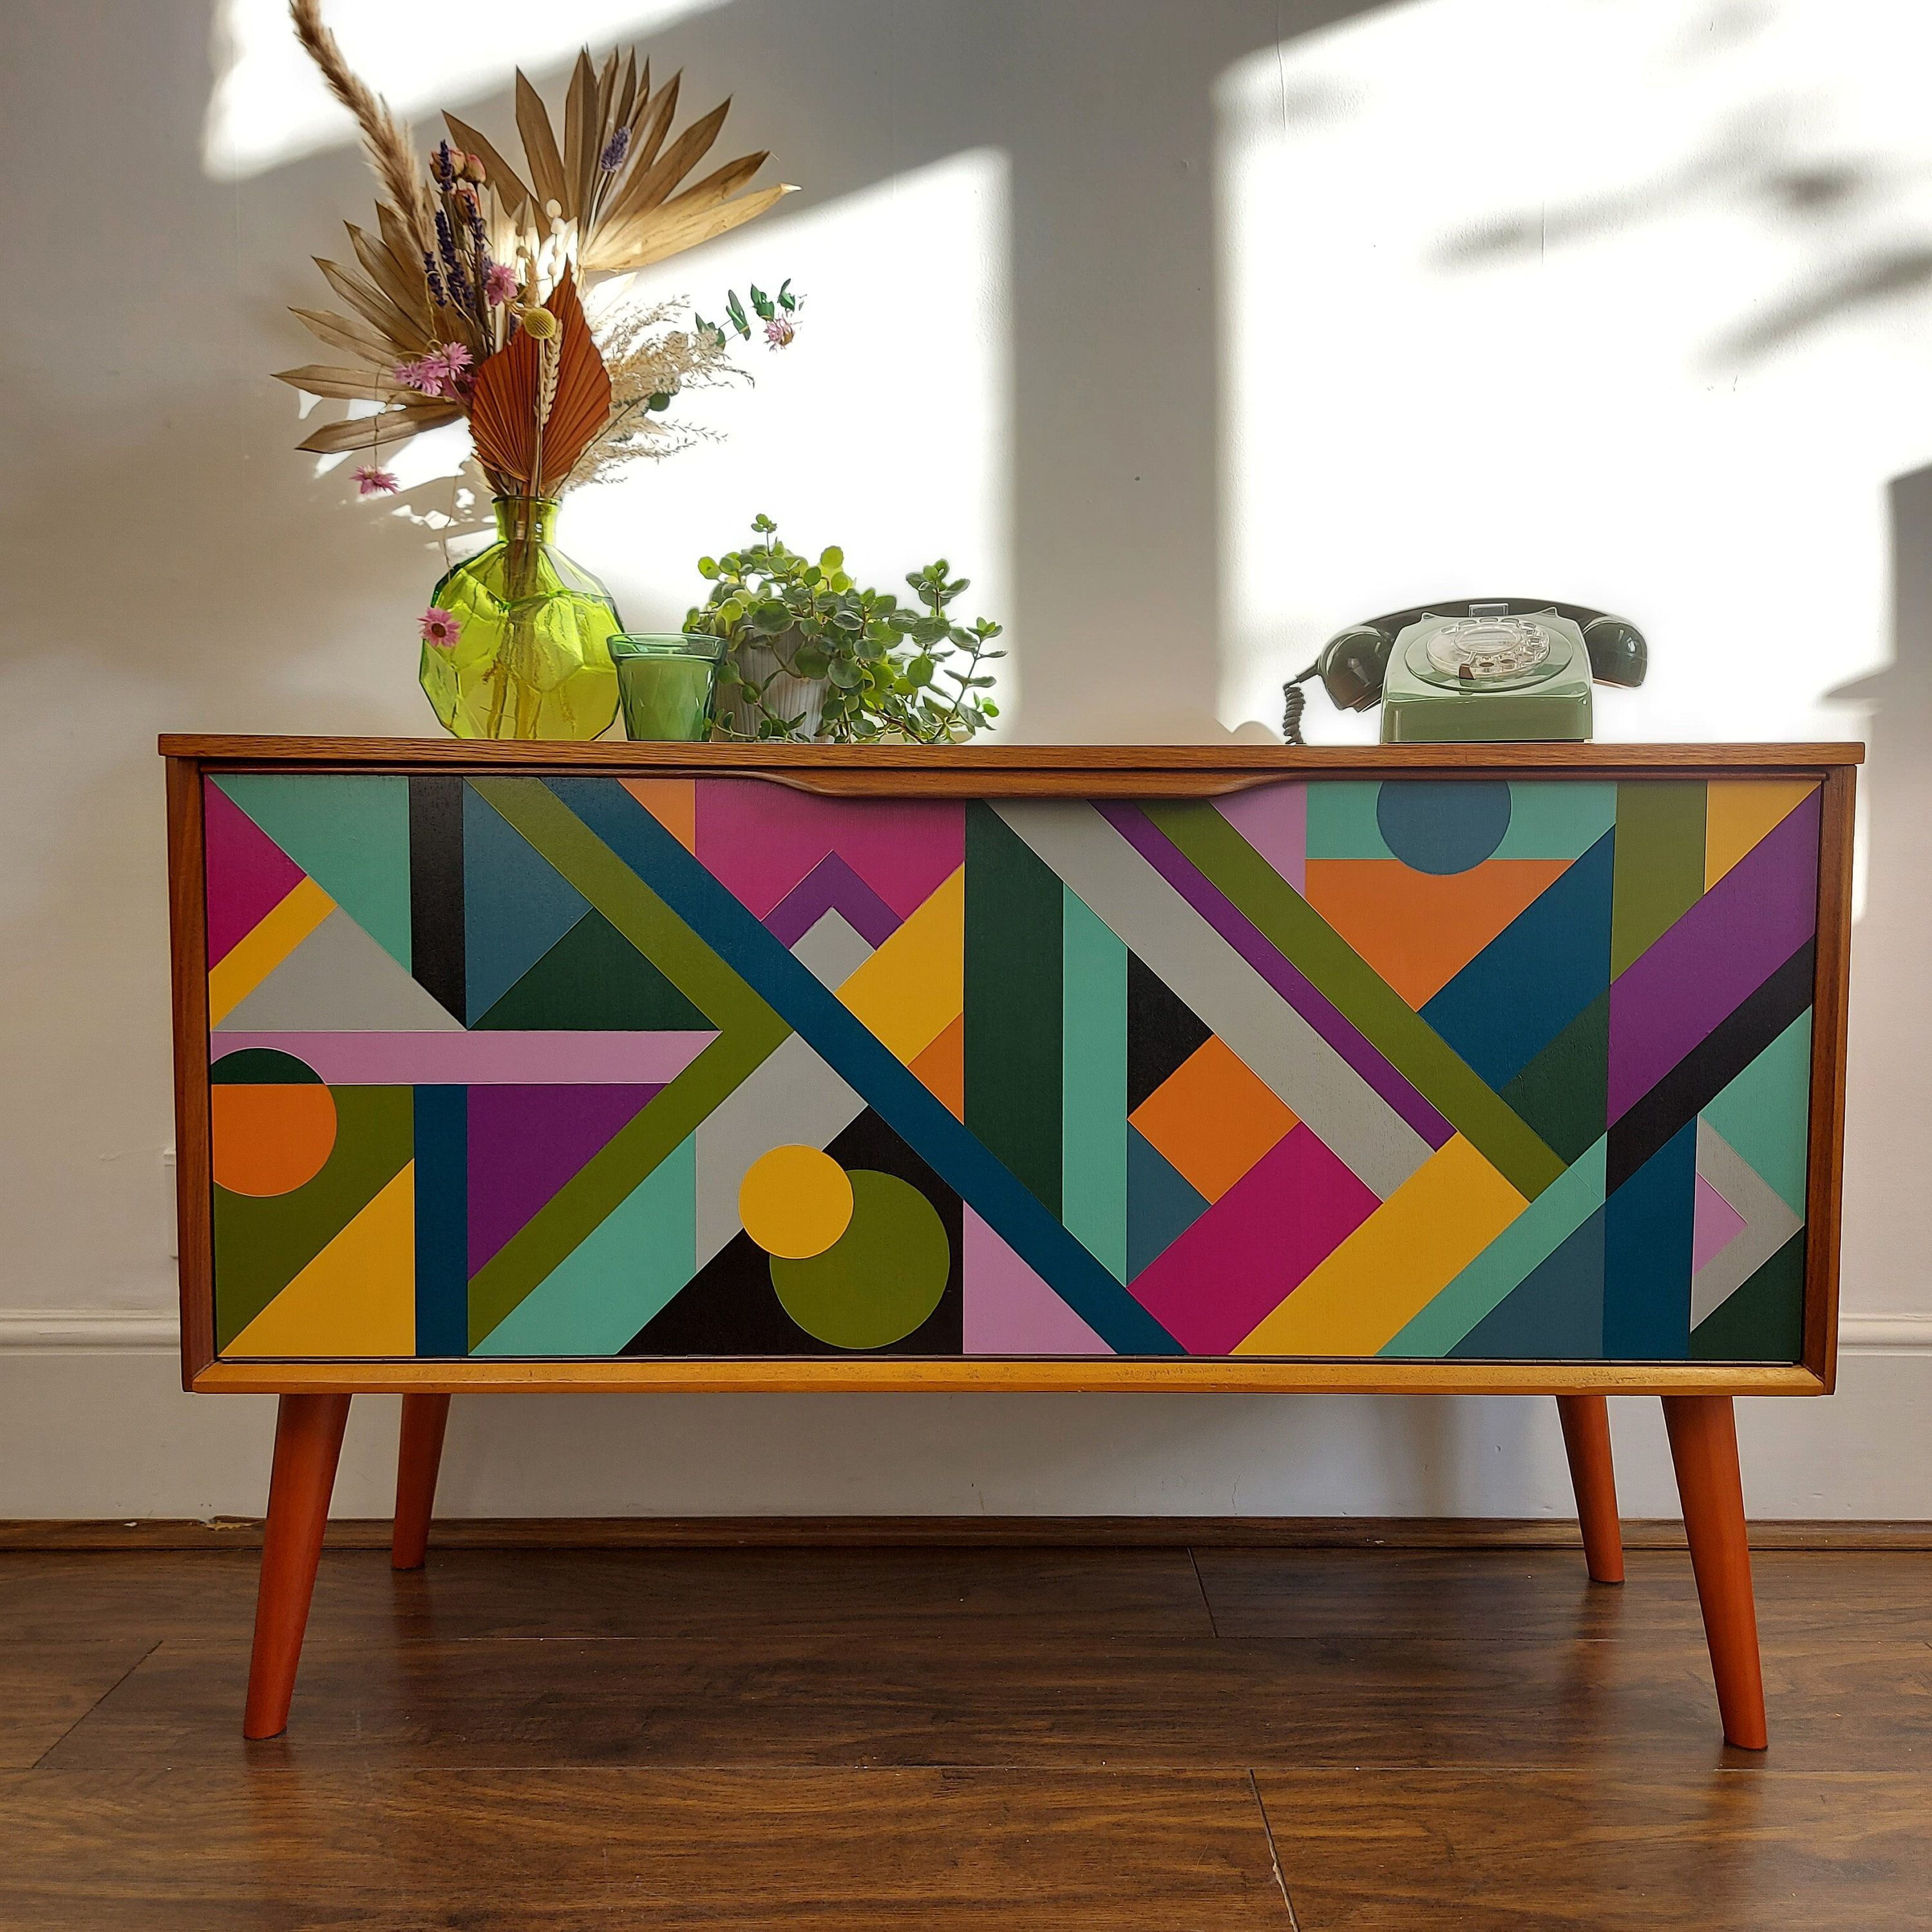 Sold Geometric Sideboard Hand Painted Credenza Up Cycled – Etsy In Geometric Sideboards (Gallery 8 of 20)